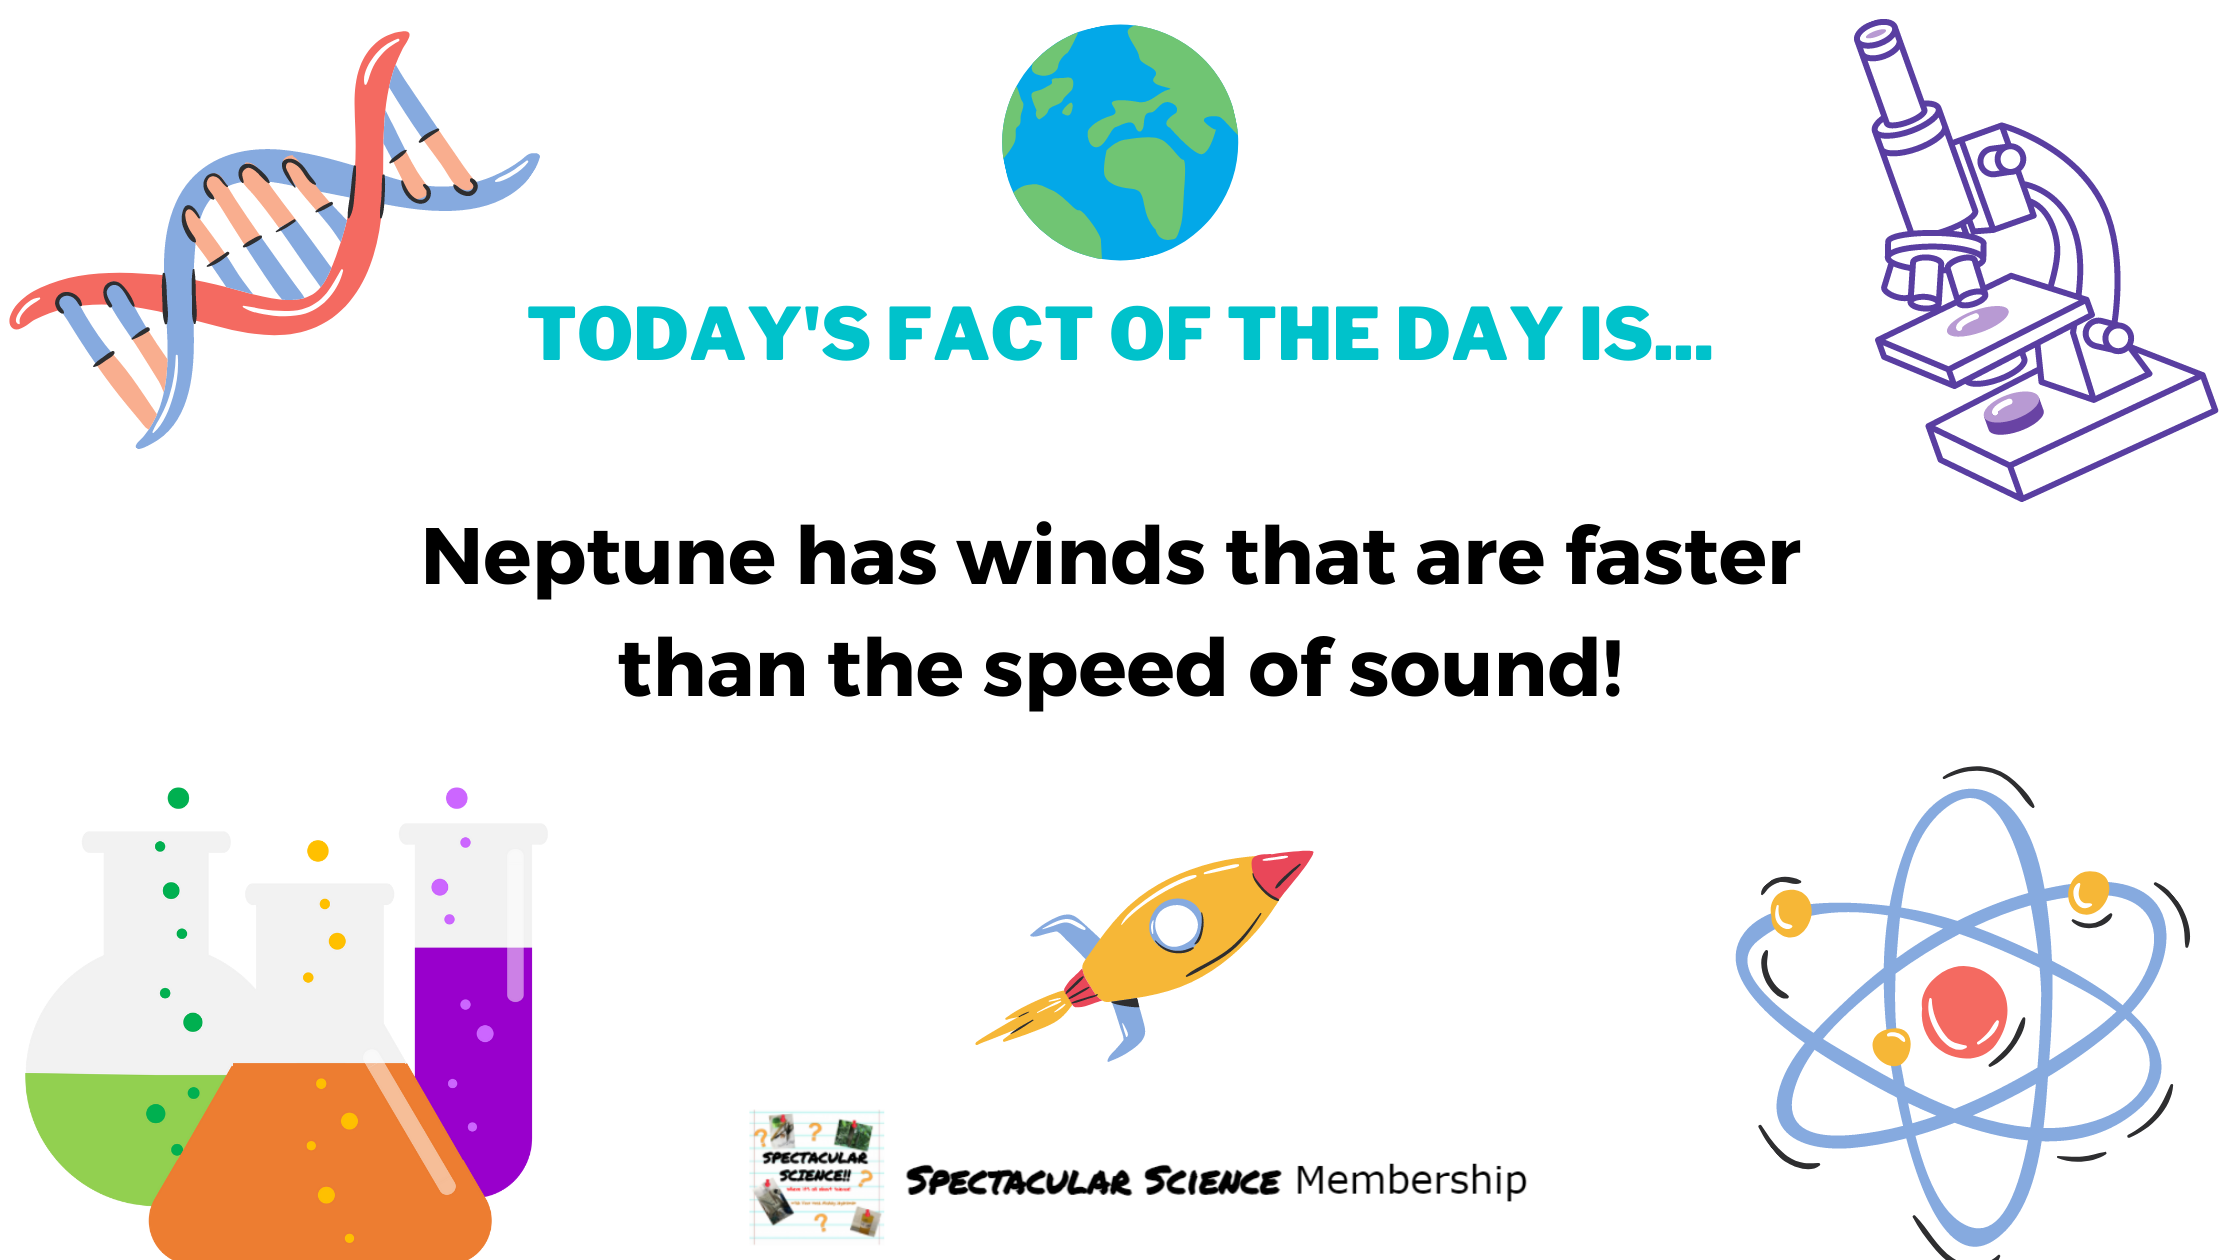 Fact of the Day Image Feb. 14th